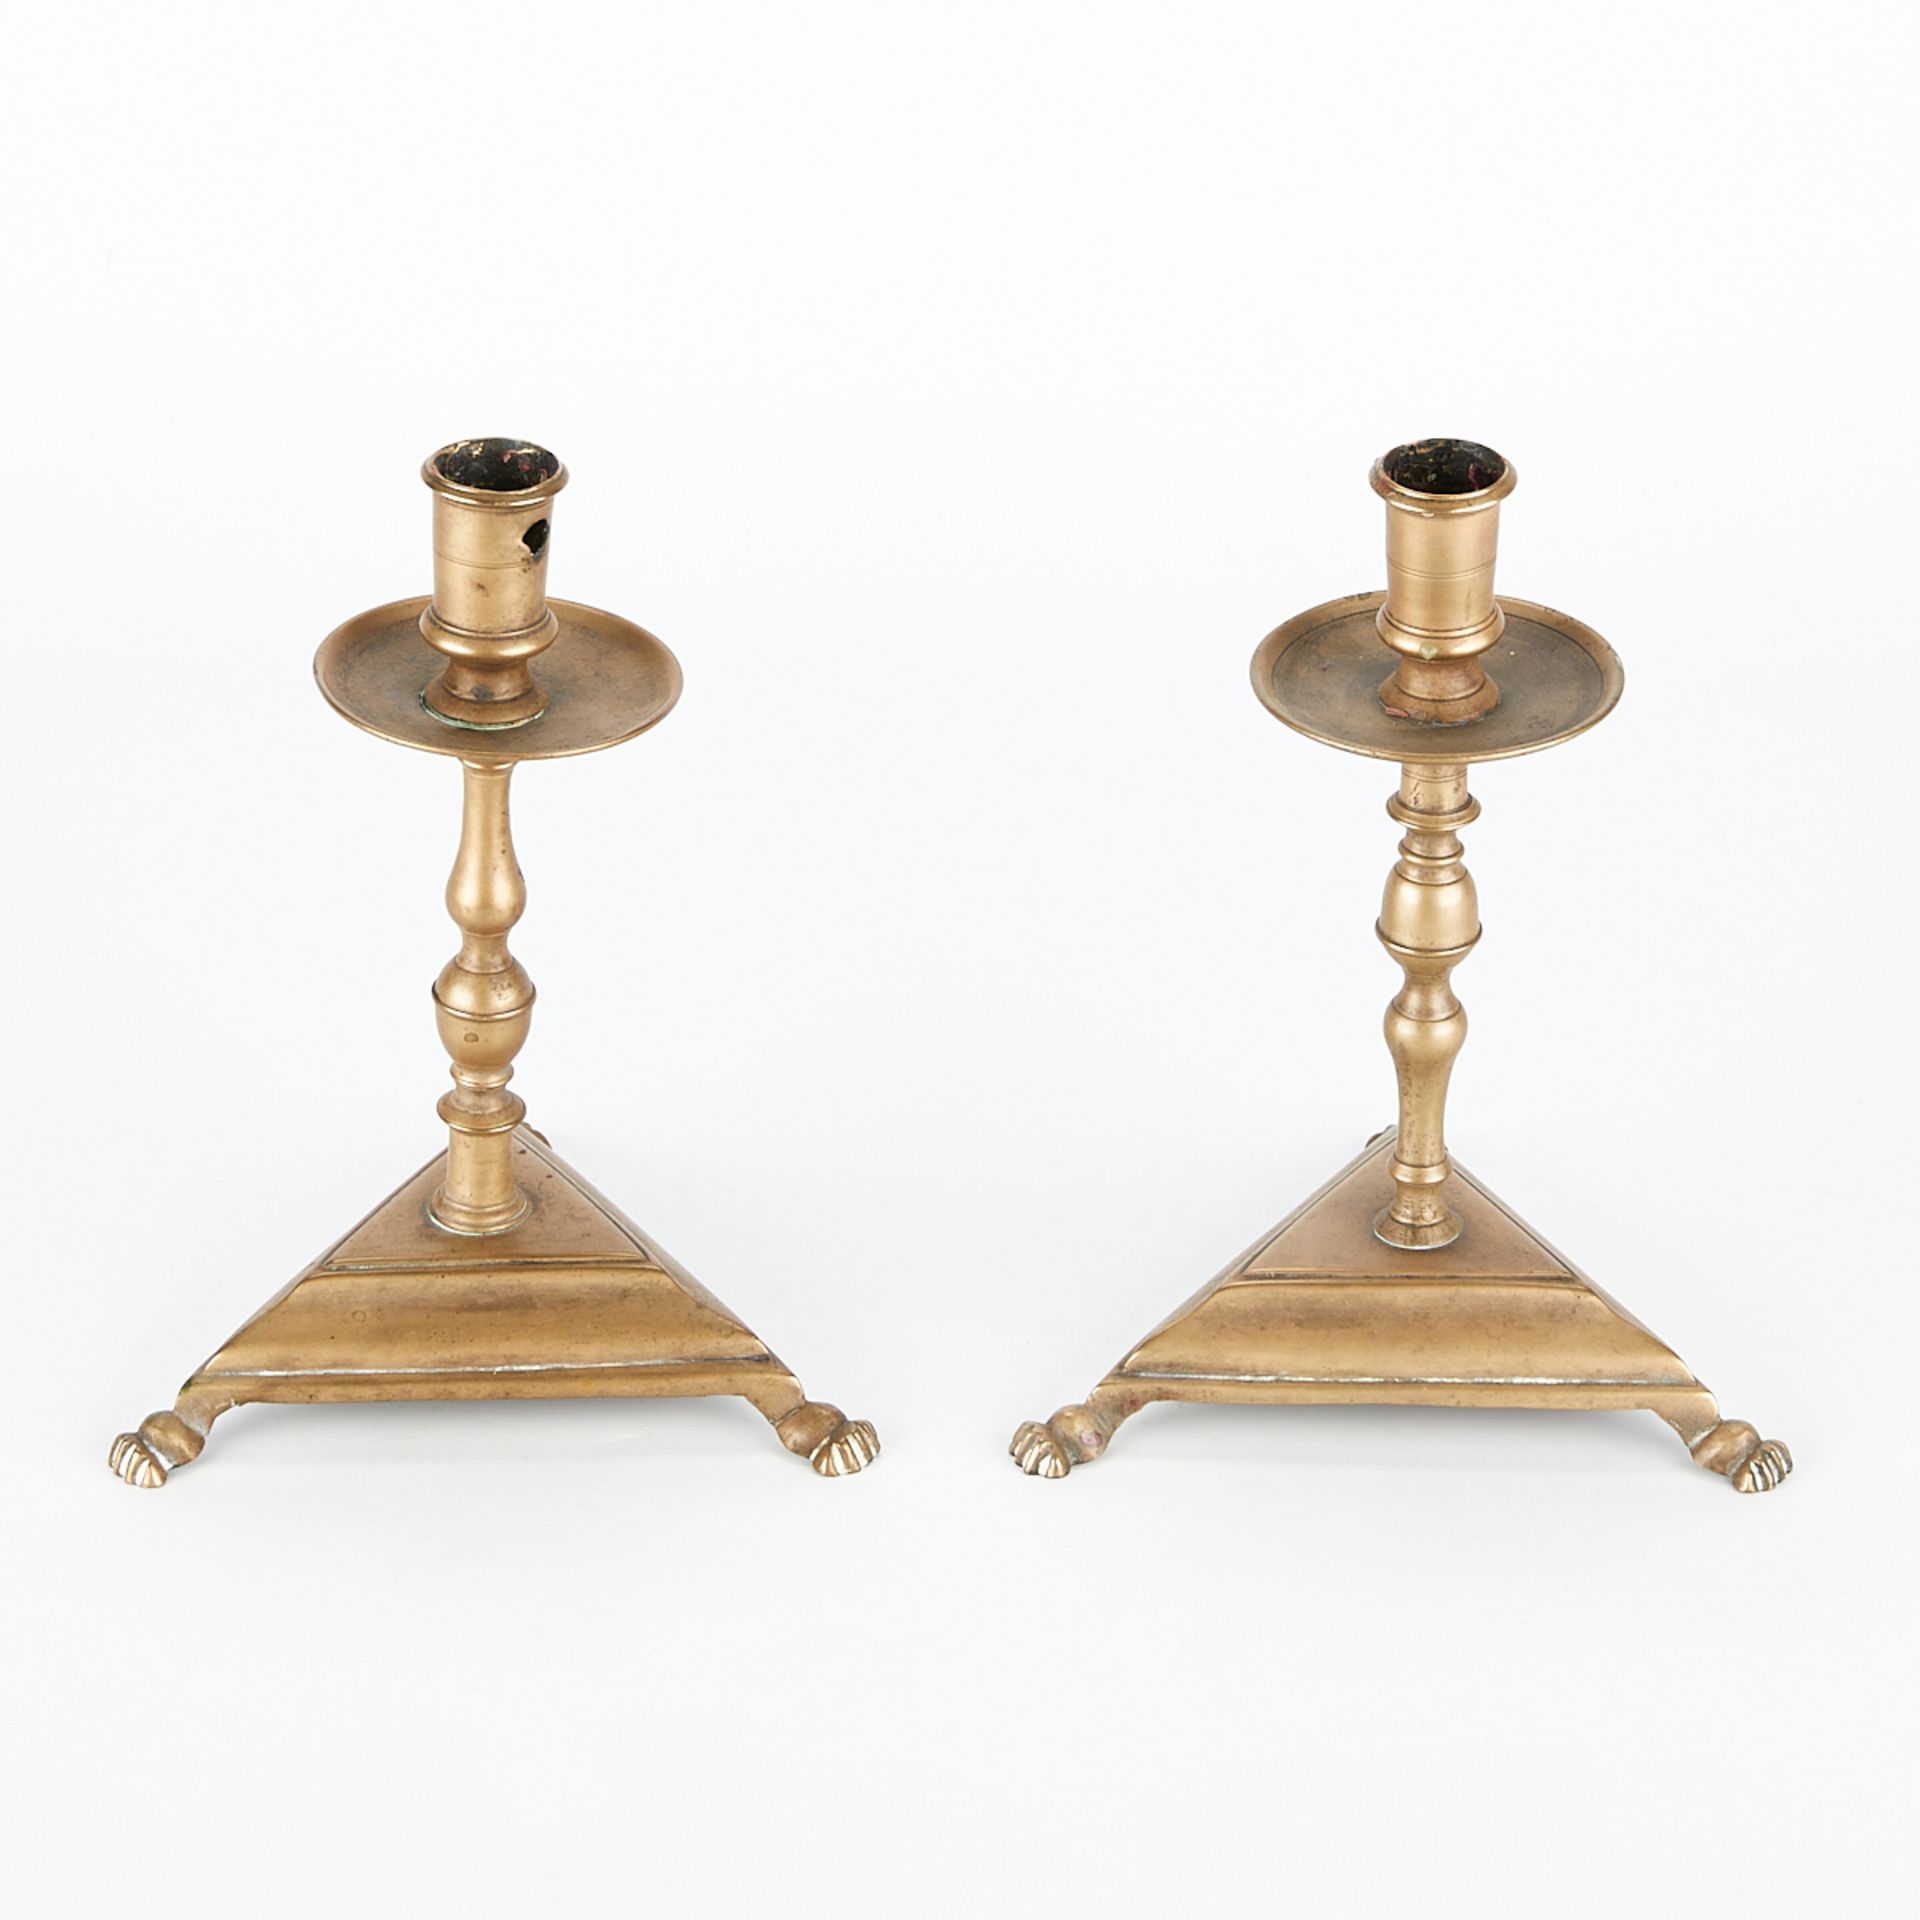 Pair of 17th c. Brass Spanish Candlesticks - Image 5 of 8